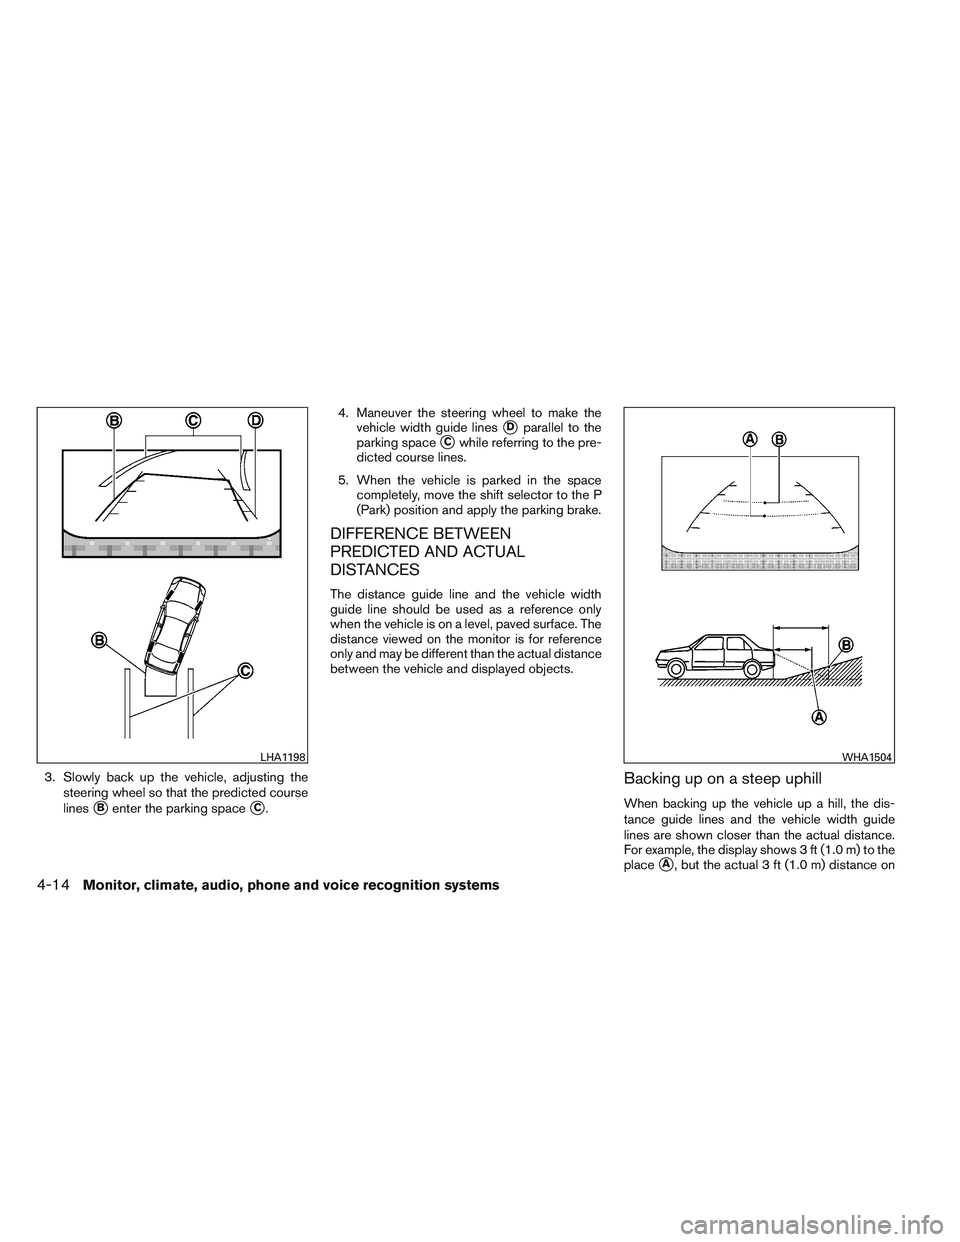 NISSAN ALTIMA SEDAN 2013  Owners Manual 3. Slowly back up the vehicle, adjusting thesteering wheel so that the predicted course
lines
Benter the parking spaceC. 4. Maneuver the steering wheel to make the
vehicle width guide lines
Dparall